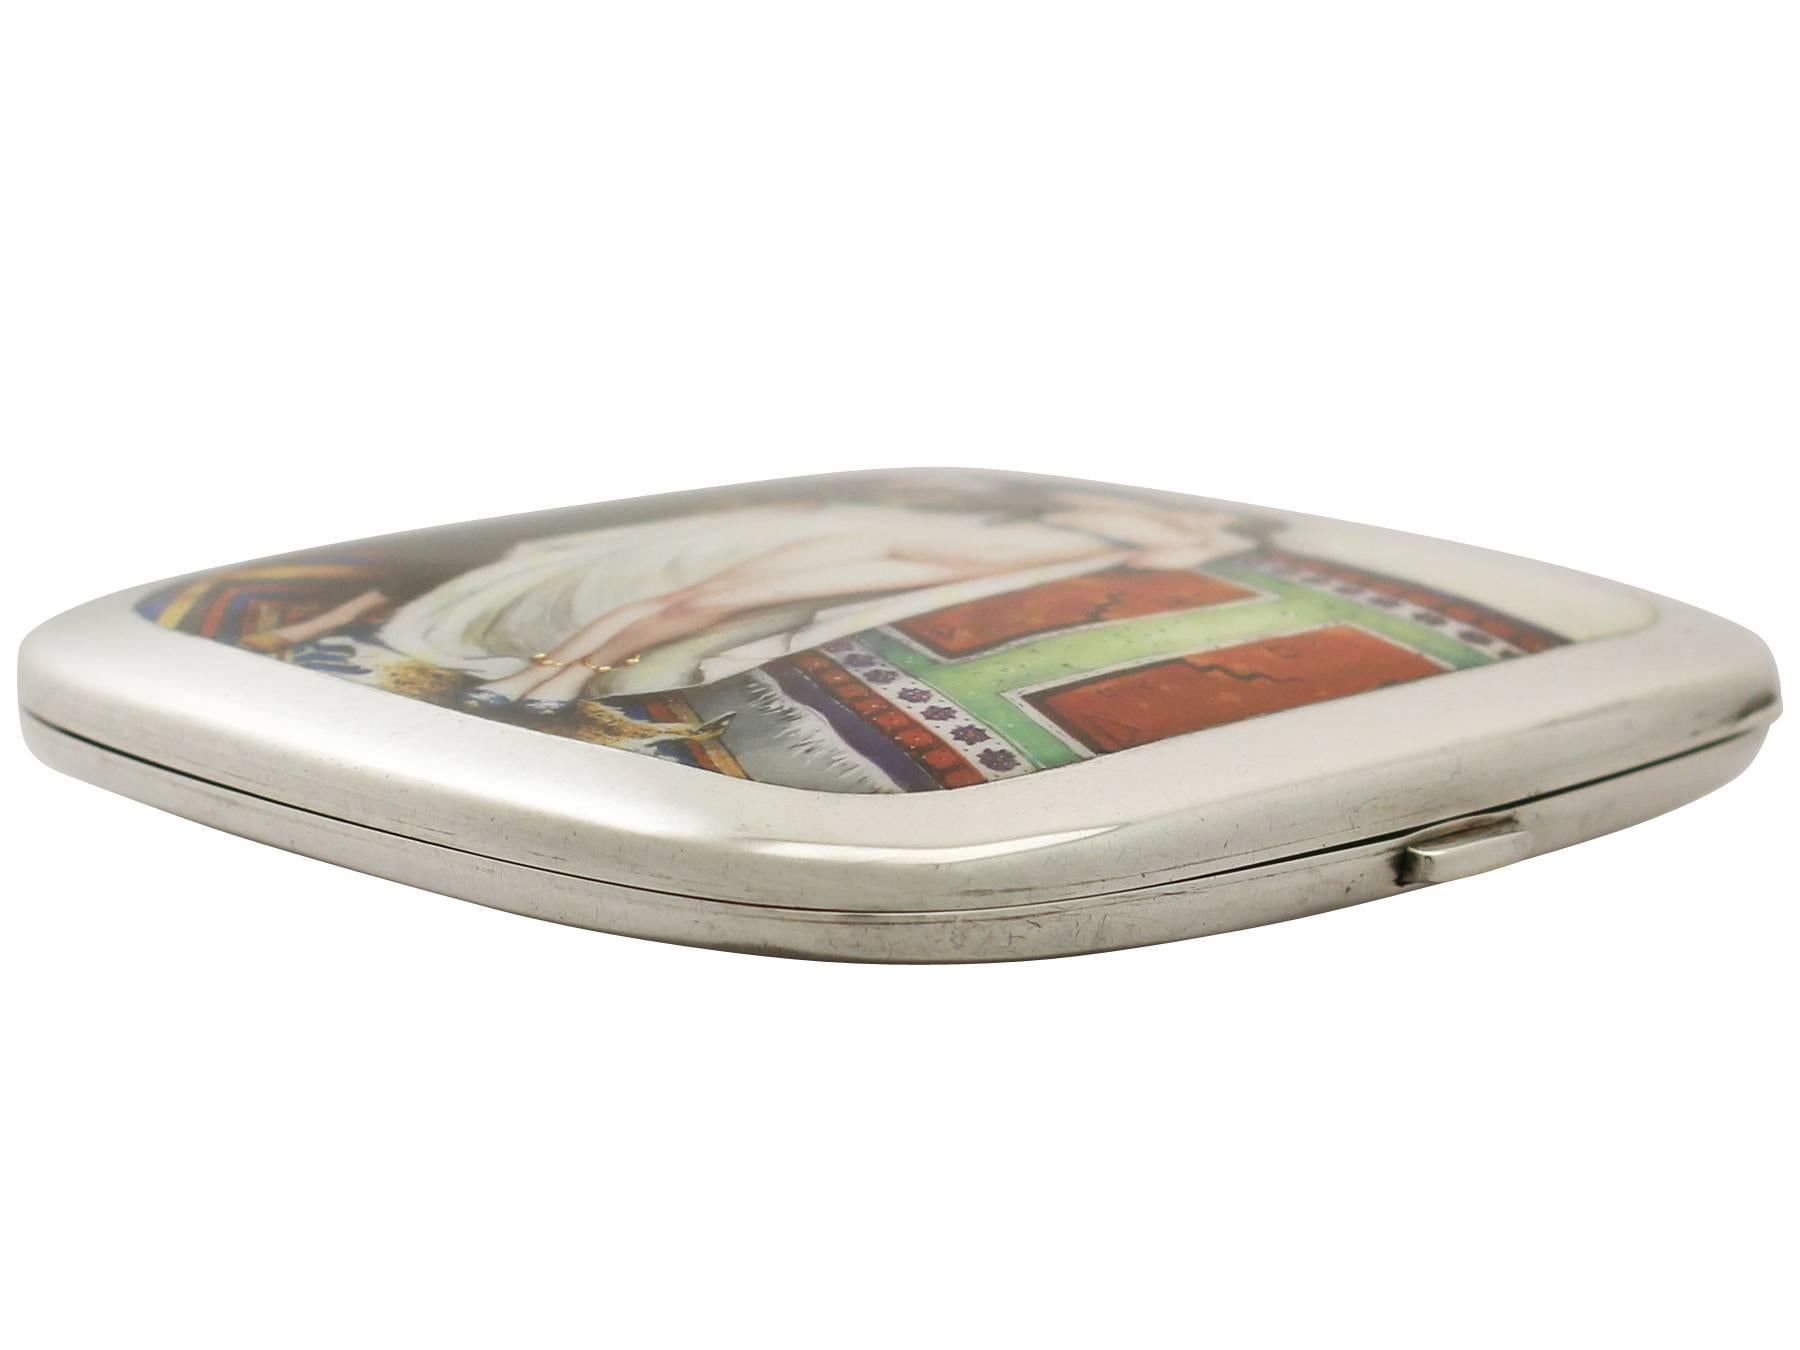 An exceptional, fine and impressive antique German 900 standard silver and erotica enamel cigarette case; an addition to our diverse range of collectable silverware

This exceptional antique German 900 standard silver cigarette case has a plain